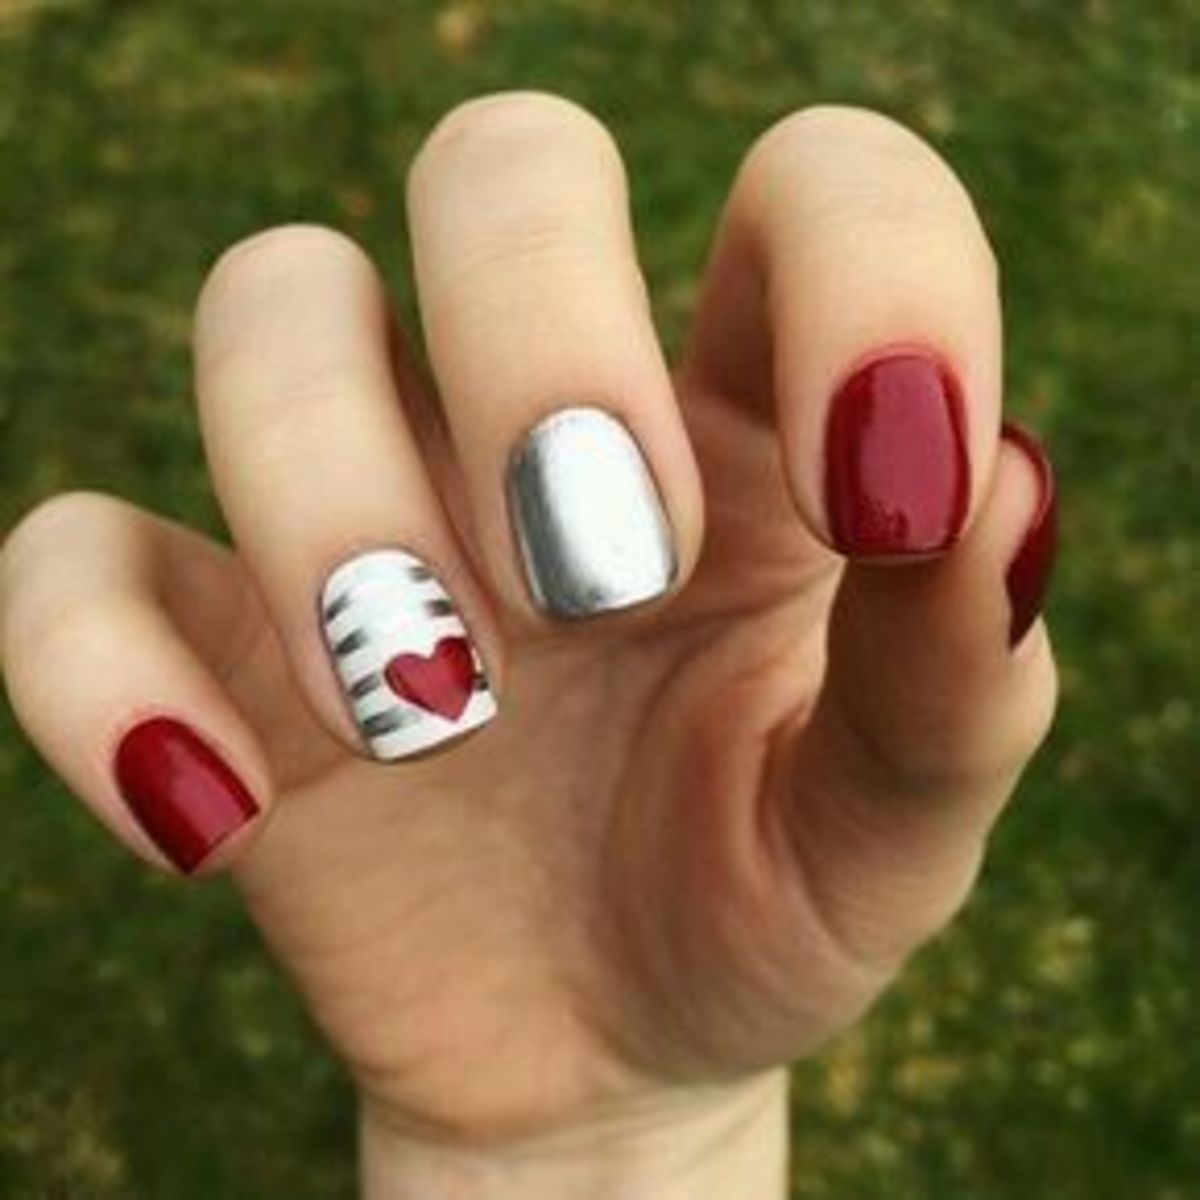 30+ Romantic DIY Valentines Day Nail Art Designs to Set Pulses Racing -  HubPages